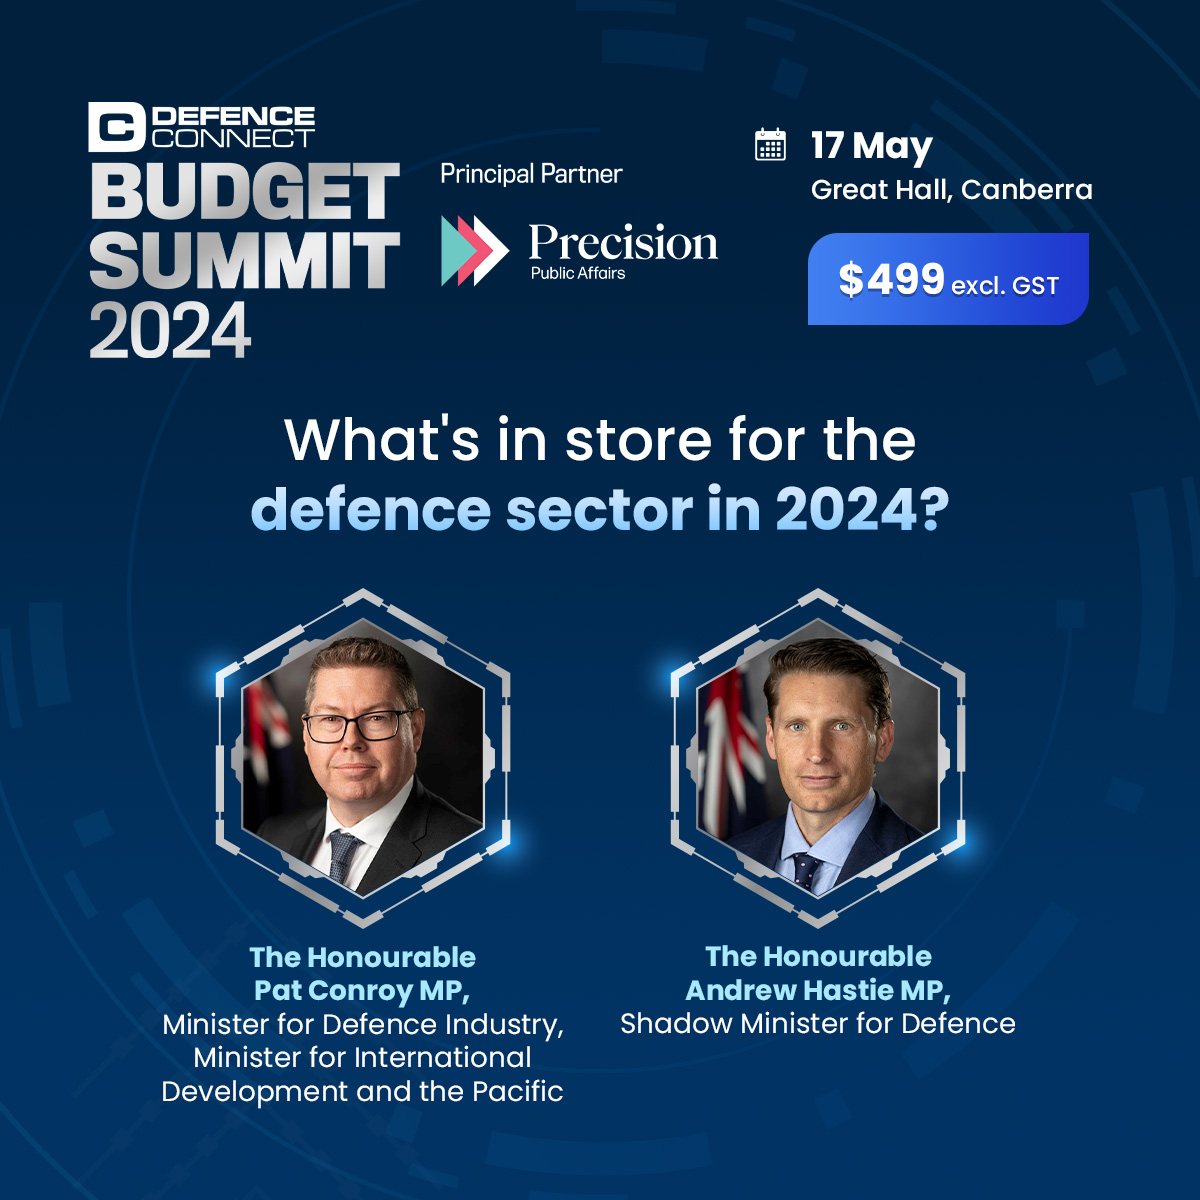 Enhance your understanding of defence industry trends and priorities at the Defence Connect Budget Summit 2024.

Secure your seat: bit.ly/3UlnNN8 

#DefenceConnectBudgetSummit #defence #nationalsecurity #budget #governmentfunding #strategy #policy